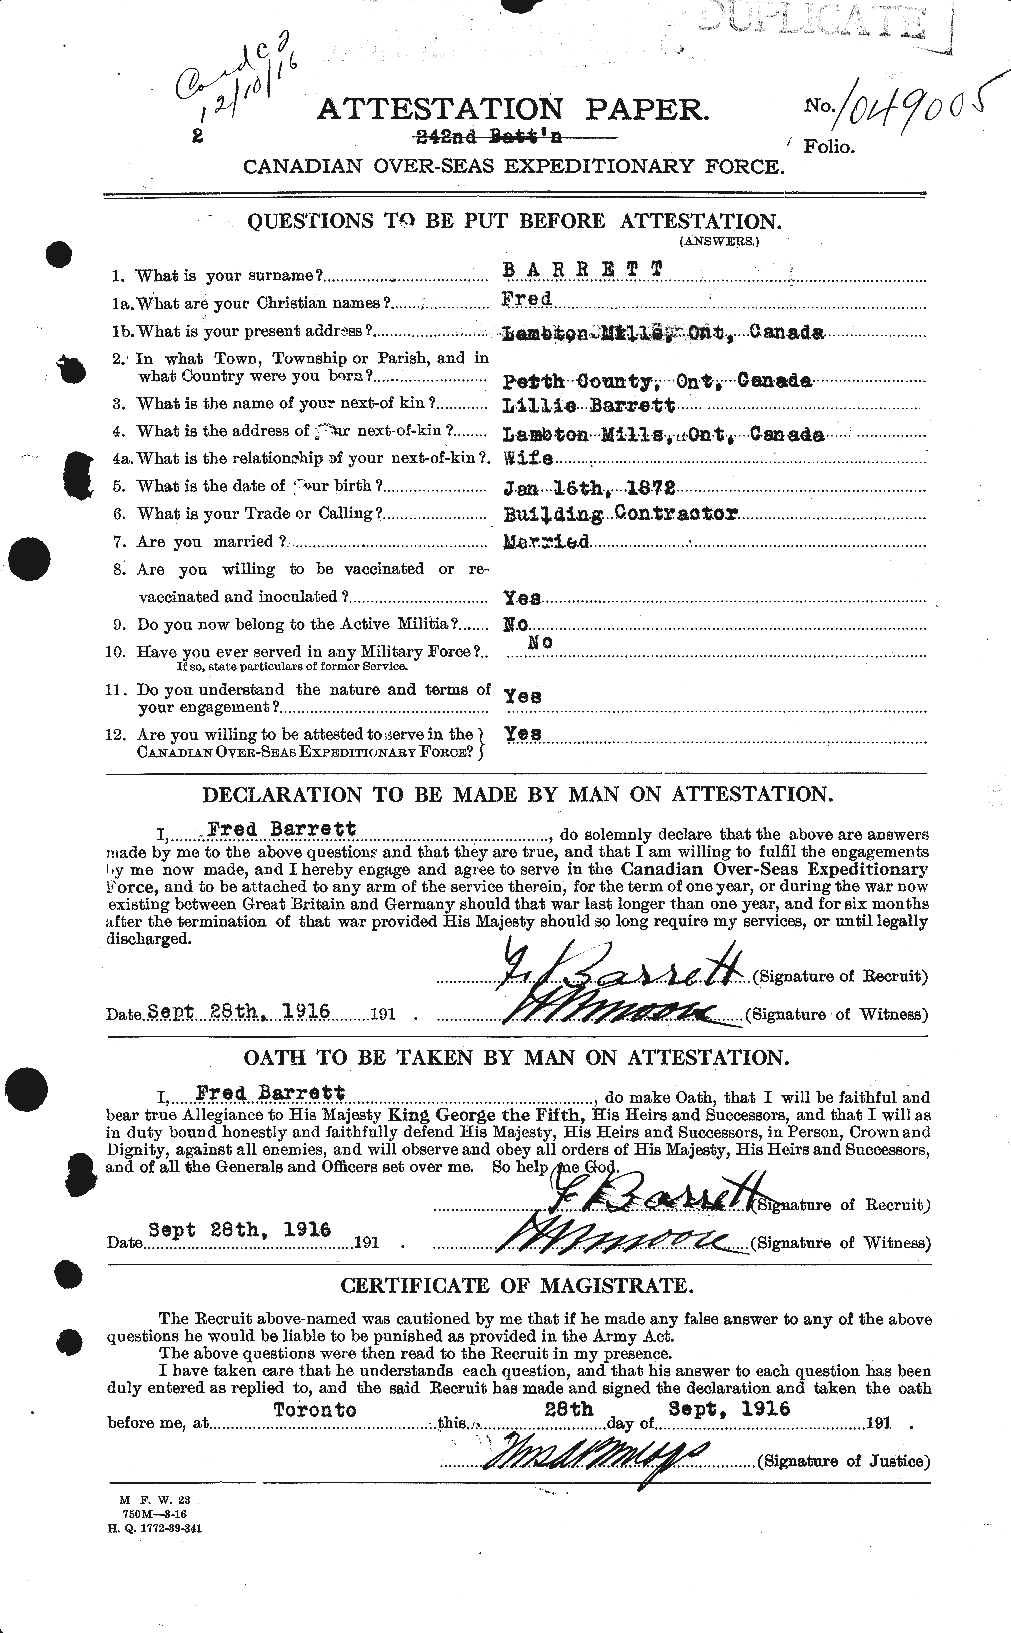 Personnel Records of the First World War - CEF 220335a